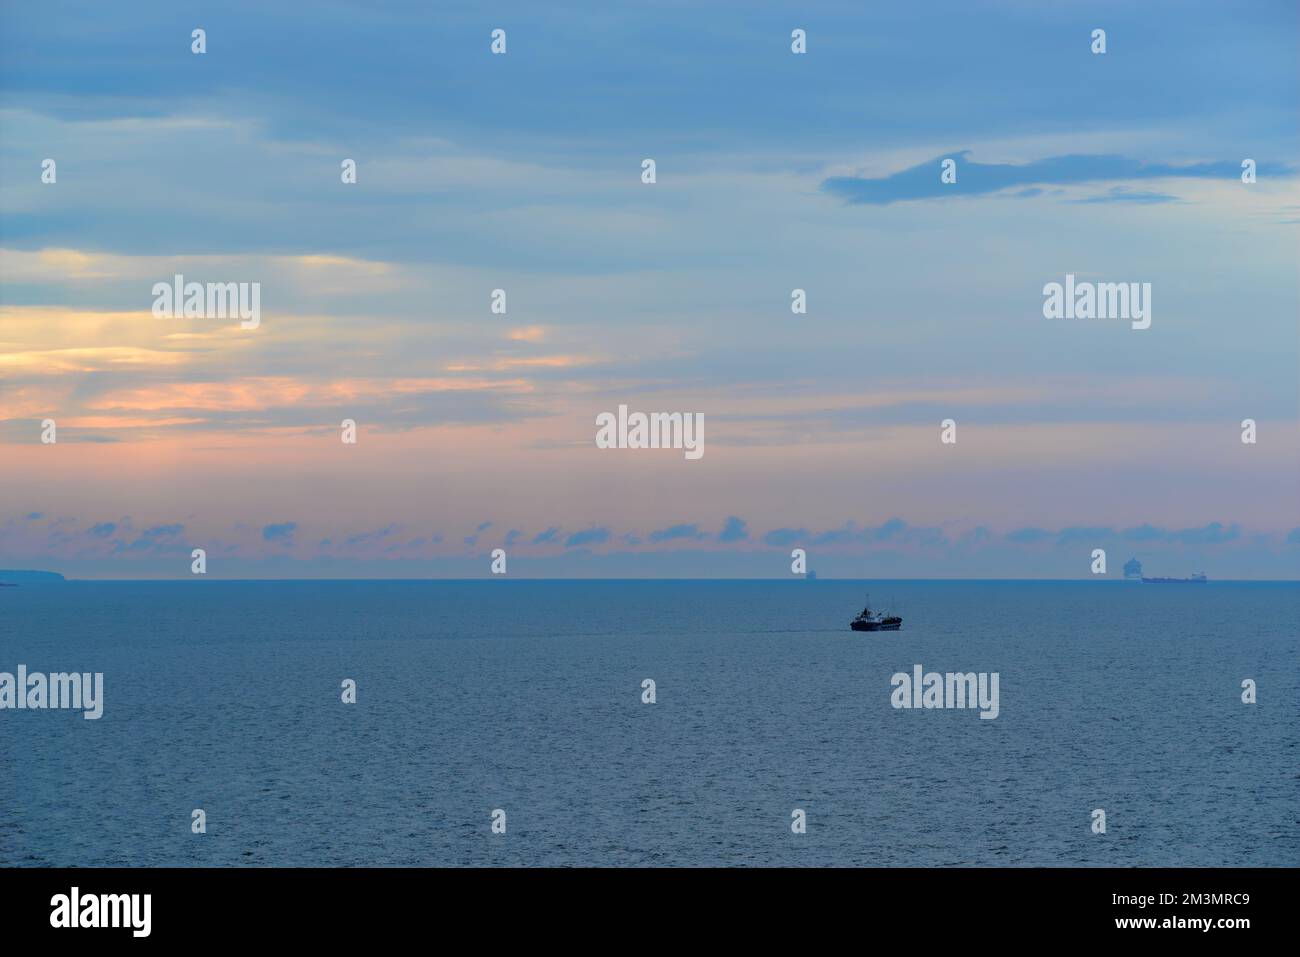 Panoramic view of sea and ship against horizon over water Stock Photo